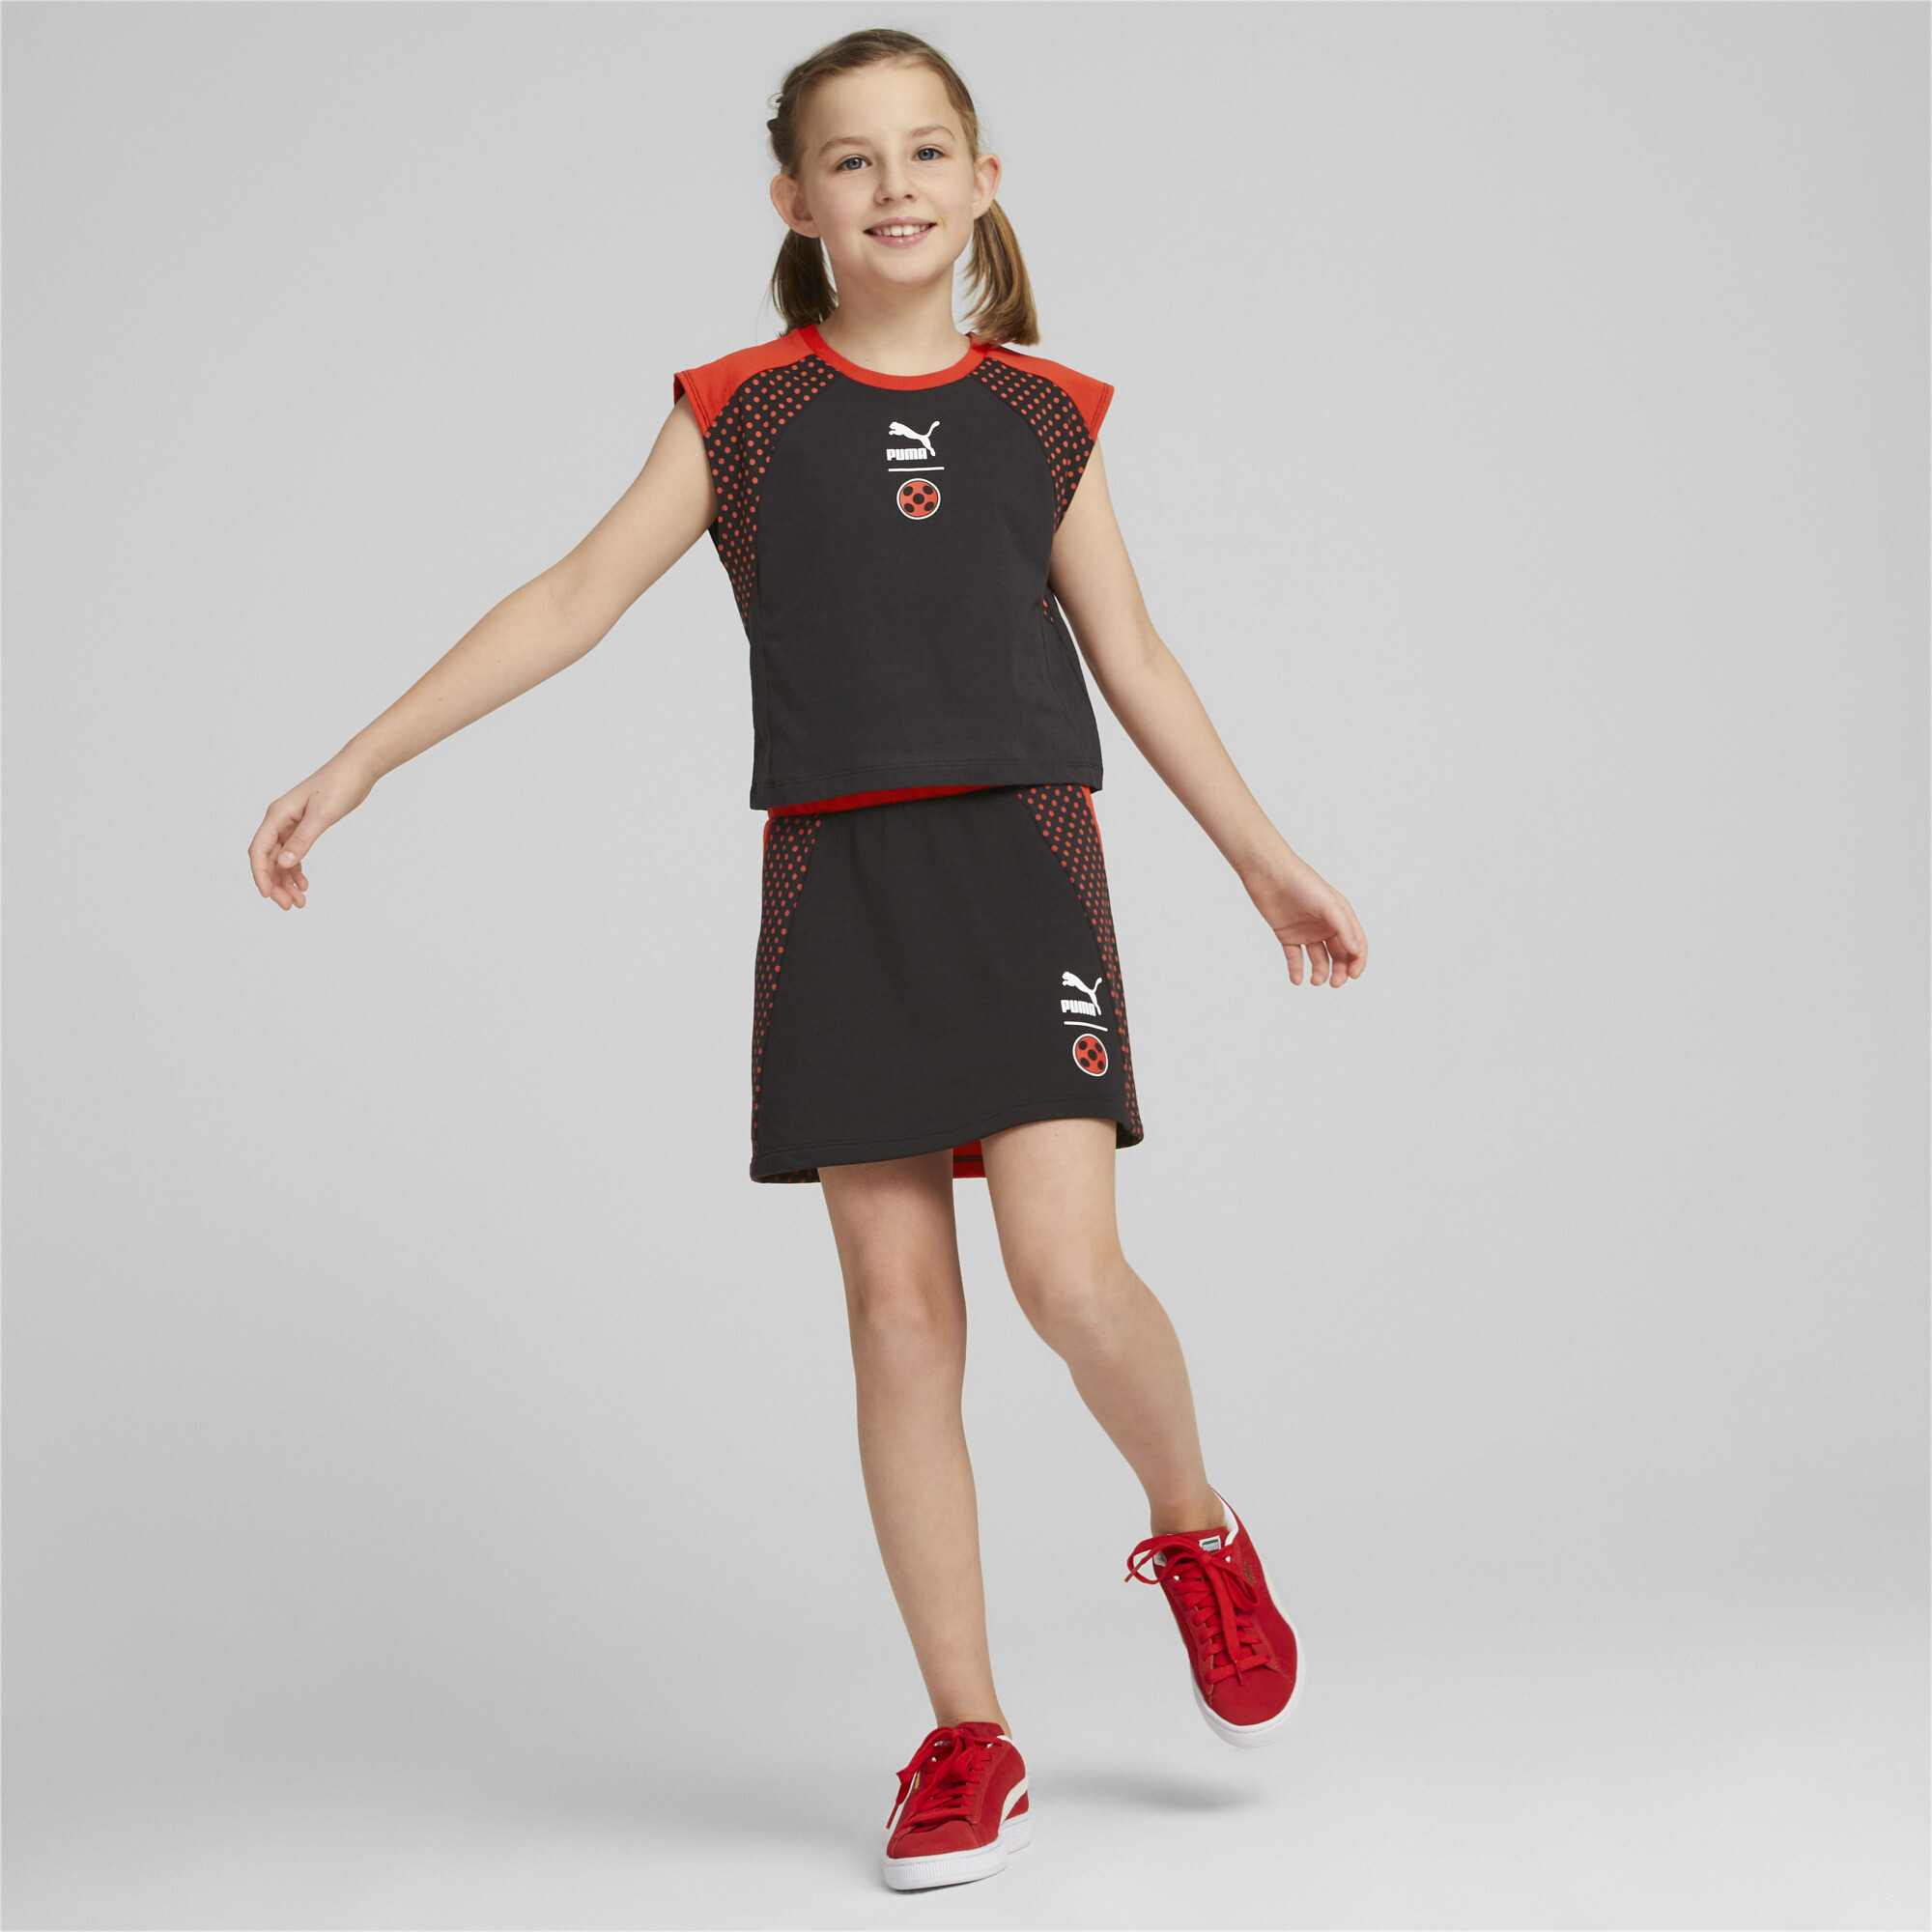 PUMA X MIRACULOUS Skirt In Black, Size 11-12 Youth